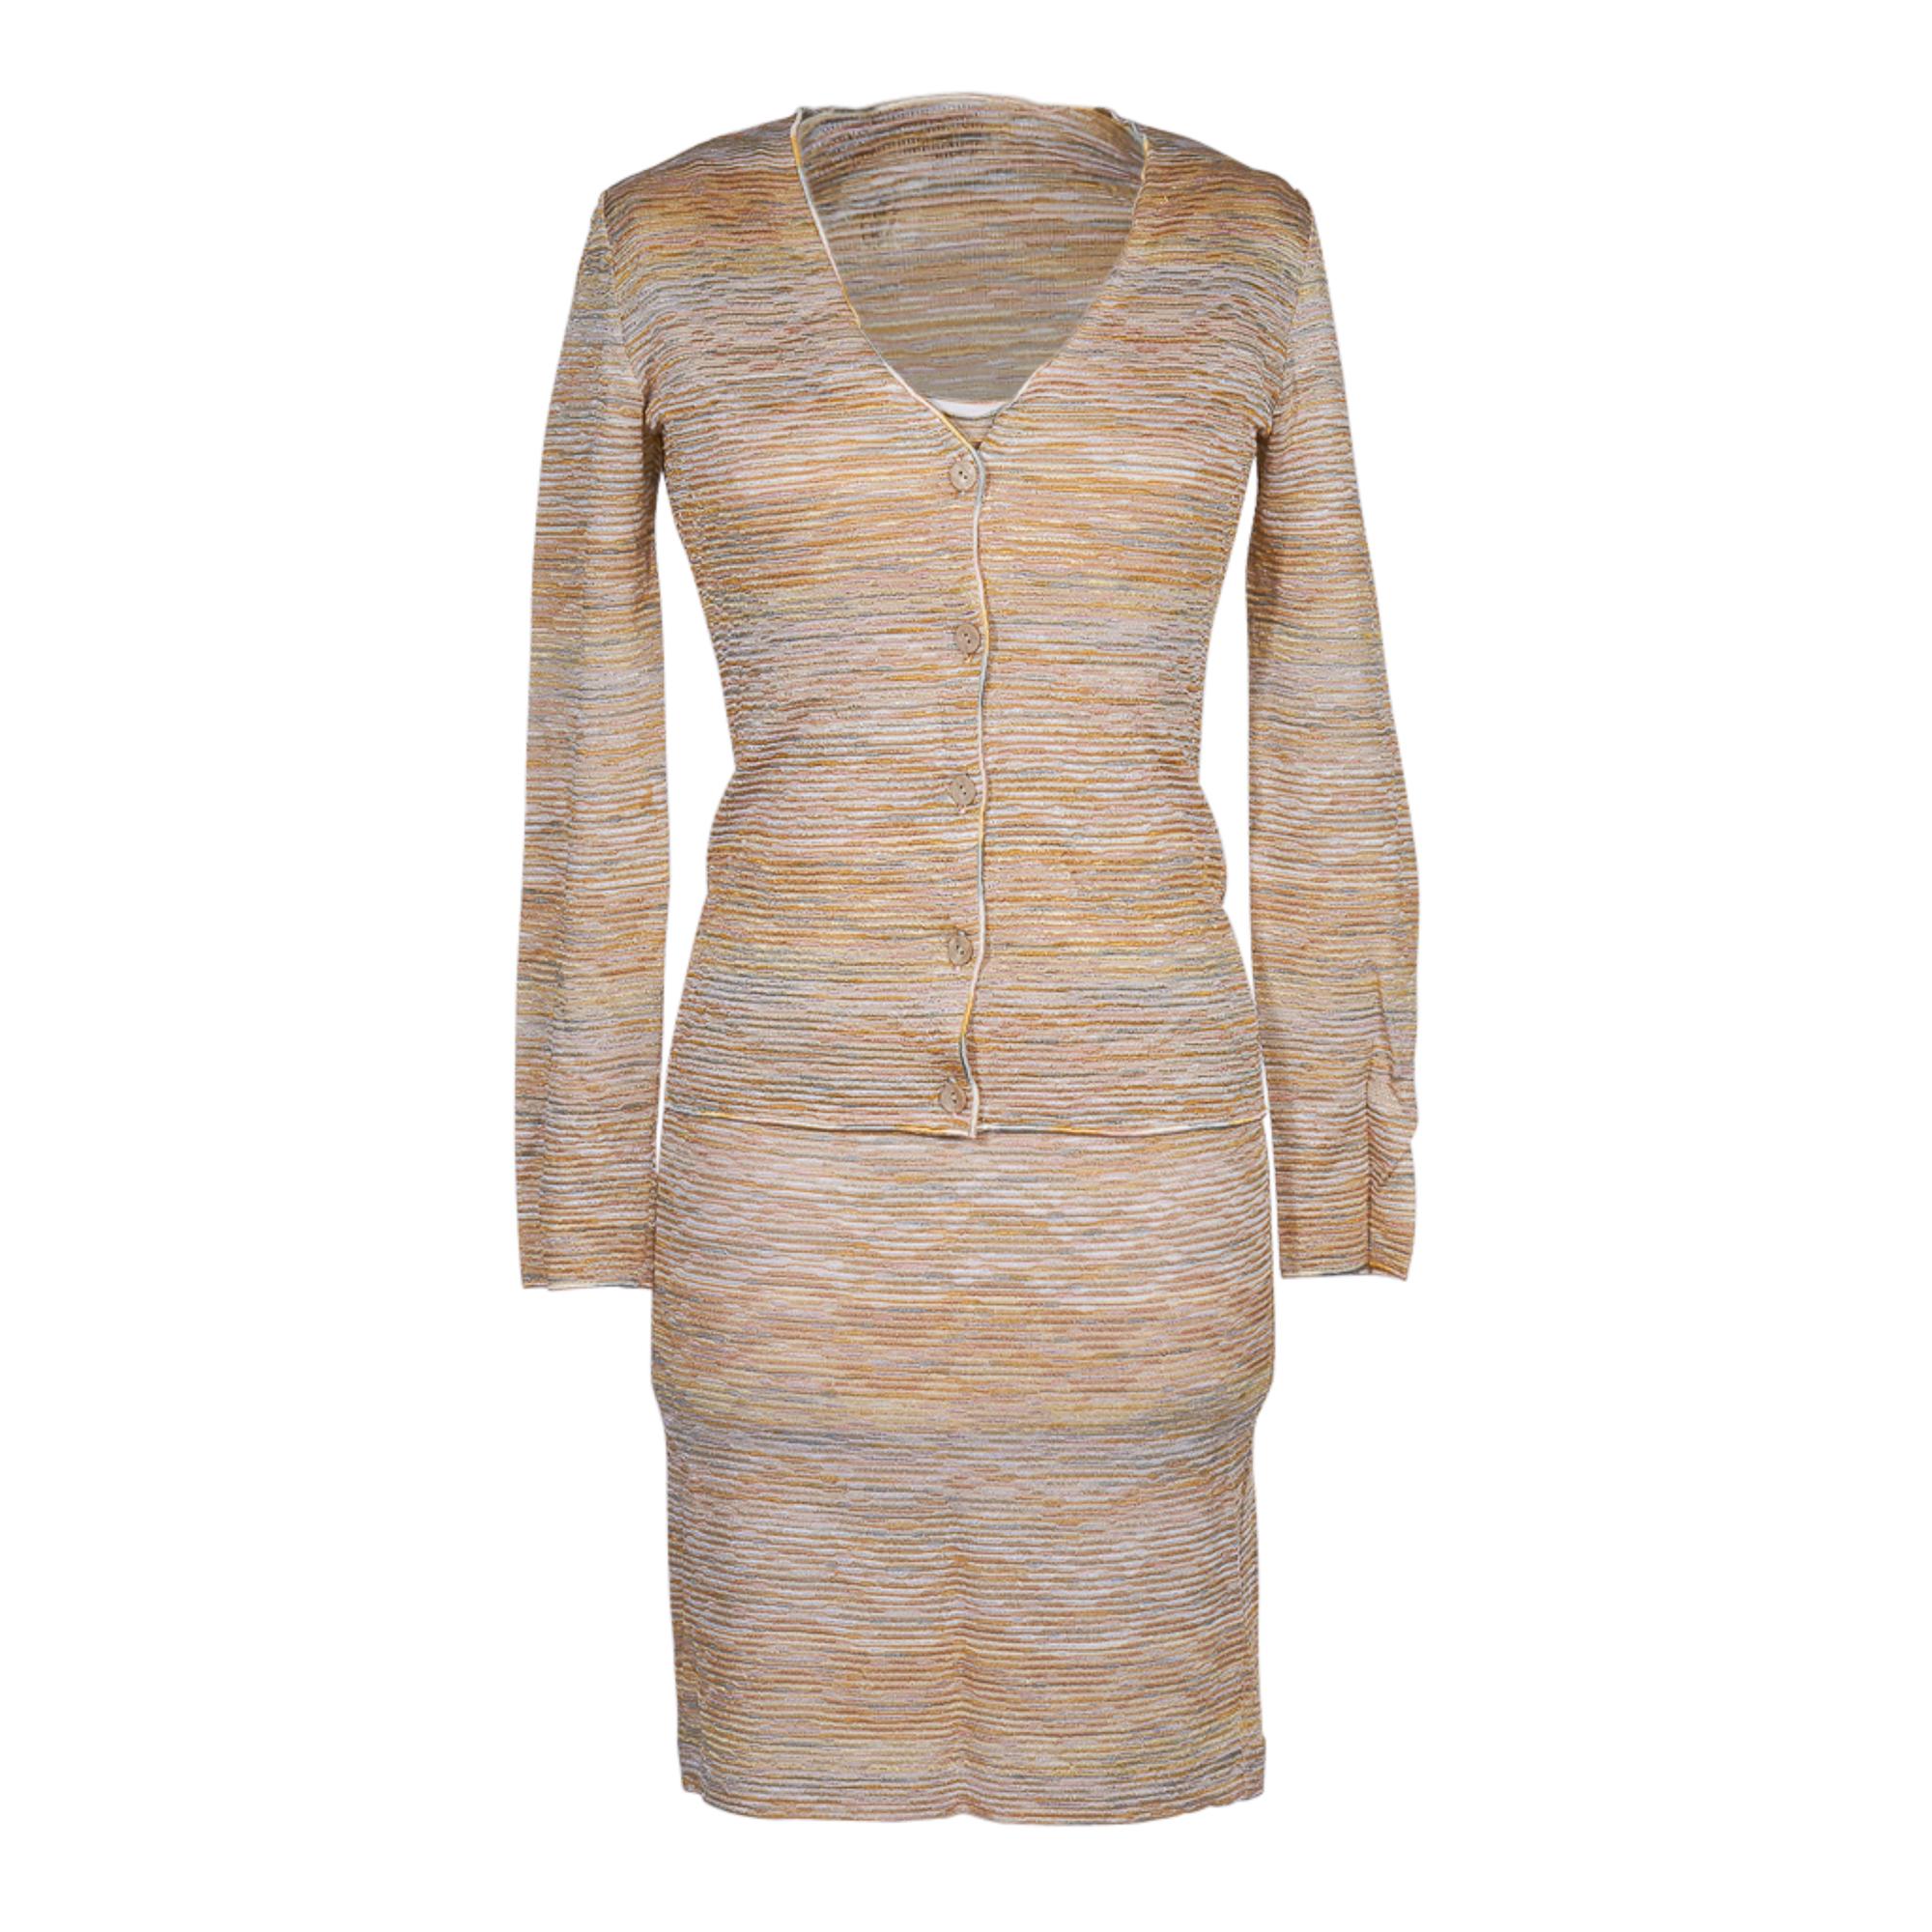 Missoni Dress and Cardigan Soft Pastel Colours Versatile 4 to 6 For Sale 3